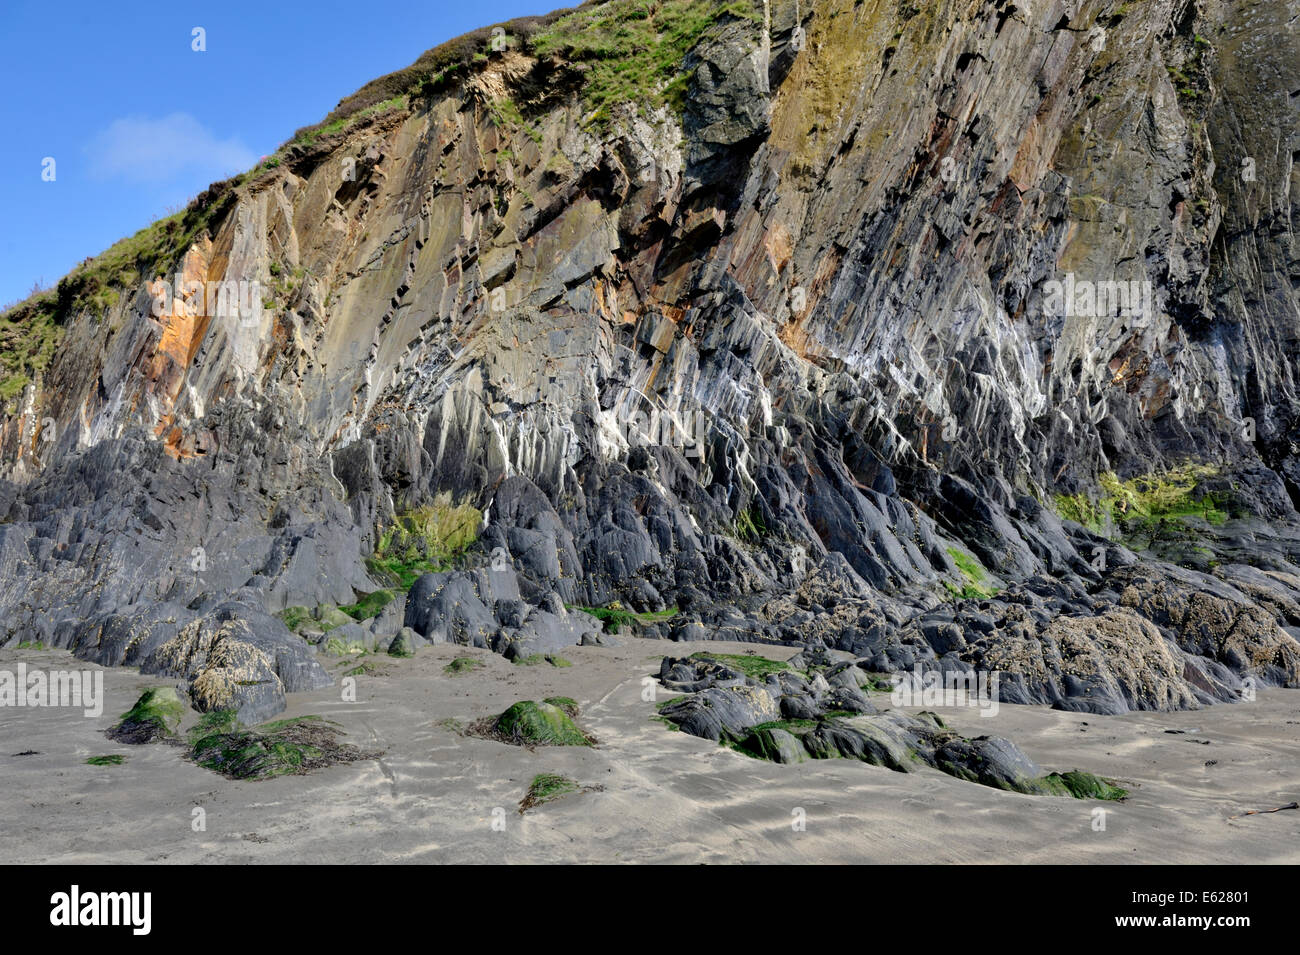 Cliff face at Pwllgwaelod beach at low tide showing intertidal marking, Pembrokeshire, Wales Stock Photo